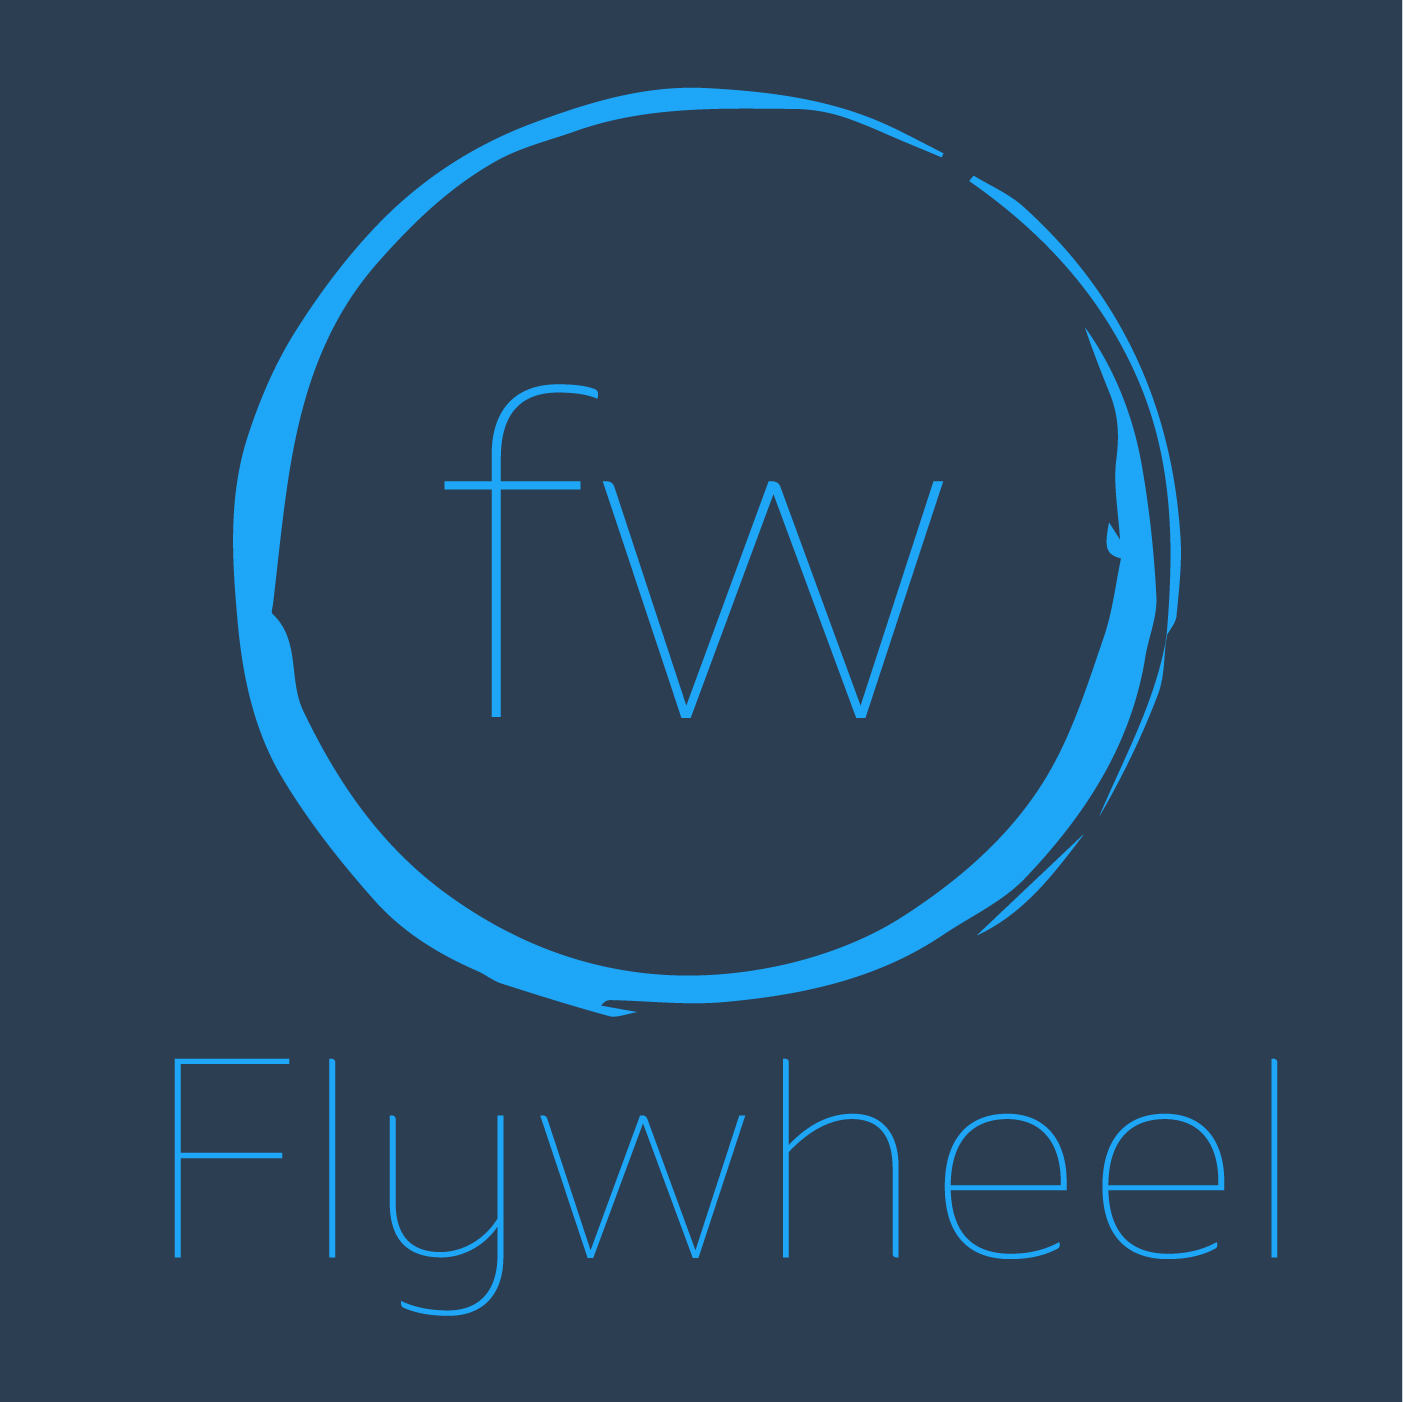 The Flywheel Podcast with Victor Jimenez: Entrepreneurship | Happiness | Business | Passion | Life | Meaning